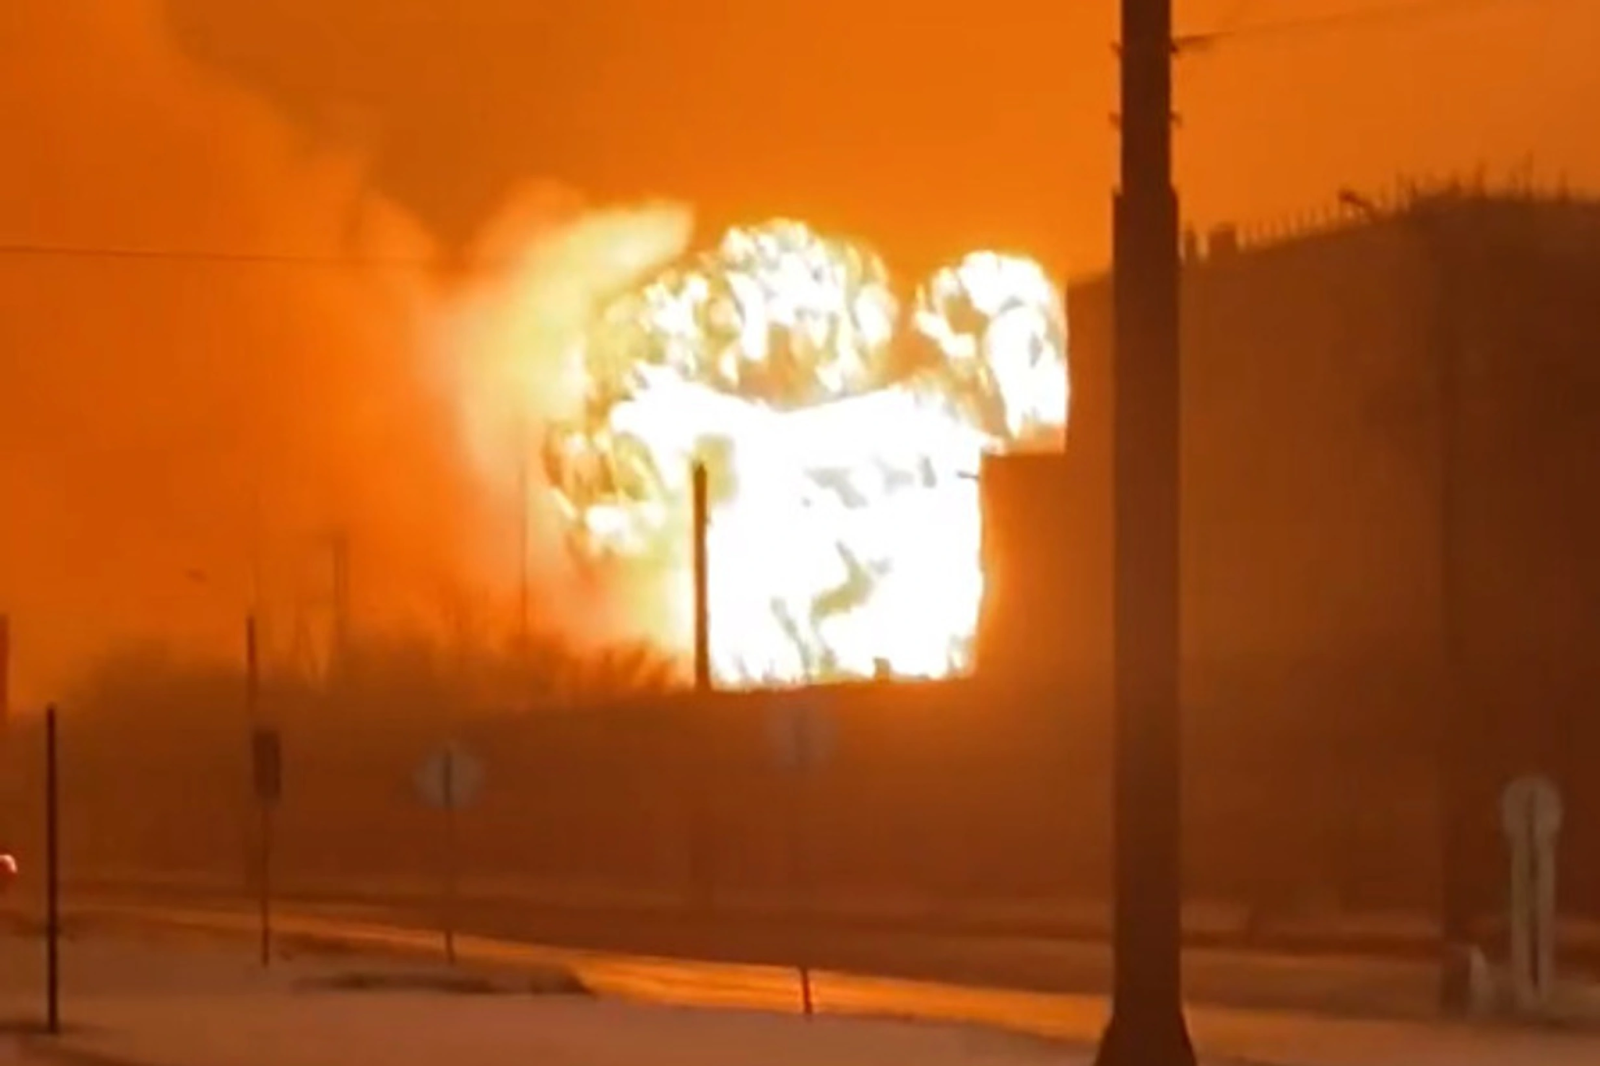 xplosion at the tractor plant in Chelyabinsk